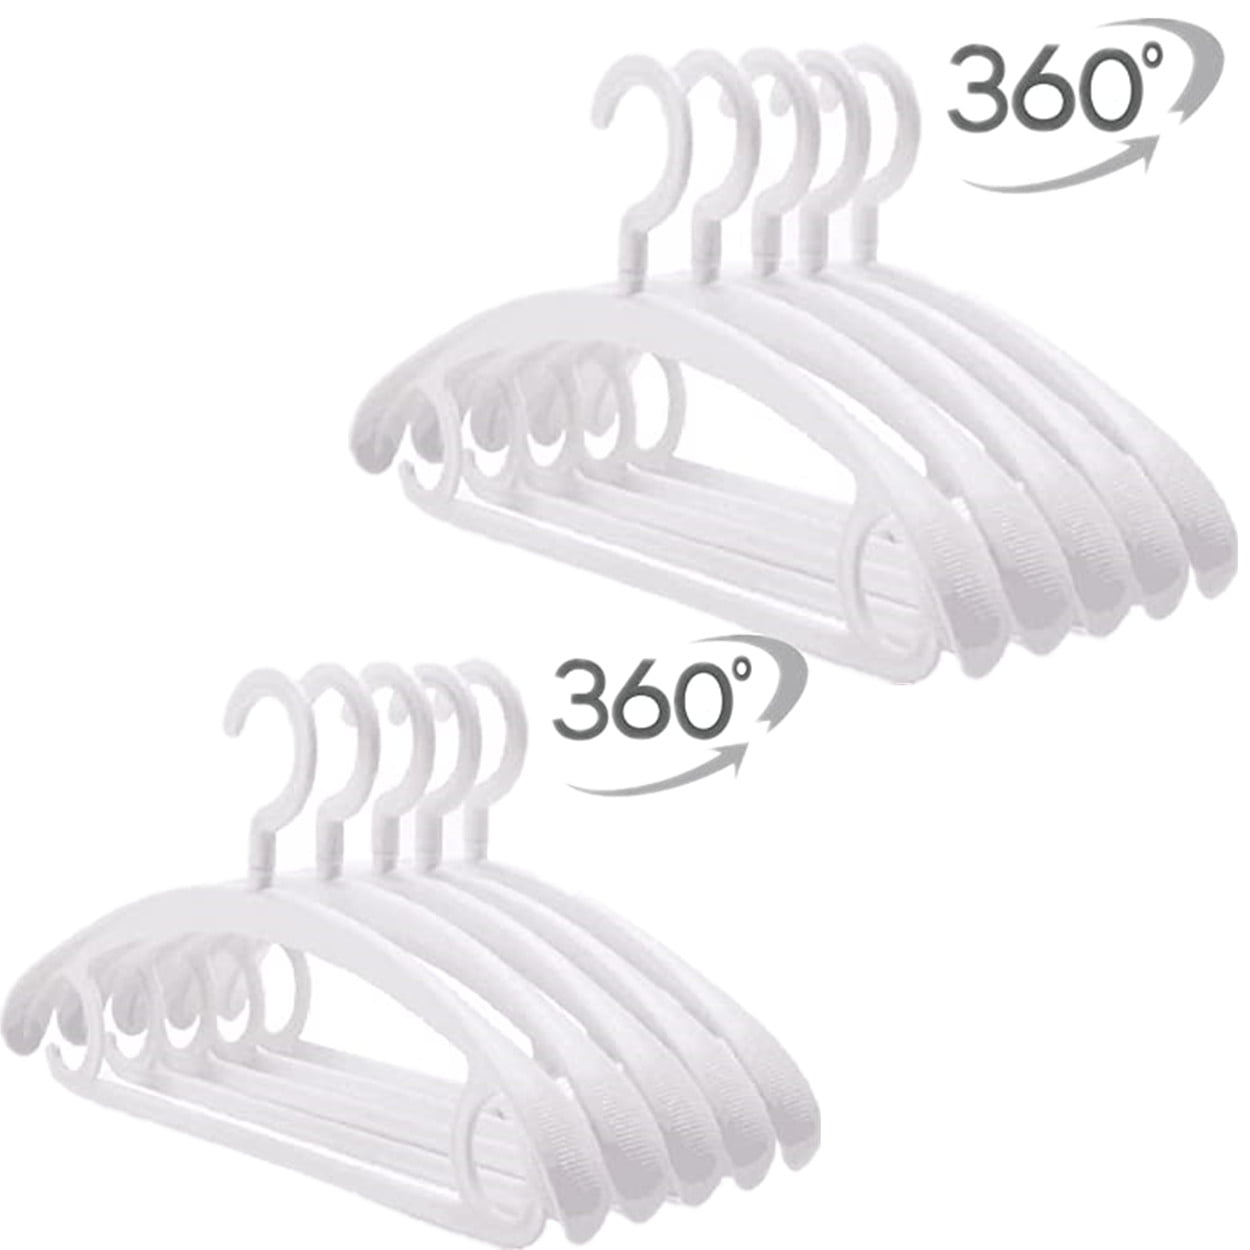 HOUCOC Plastic Hangers 50 Pack Heavy Duty Dry Wet Clothes Hangers with Non-Slip Pads - Durable Space Saving Coat Hanger,360° Swivel Hooks for